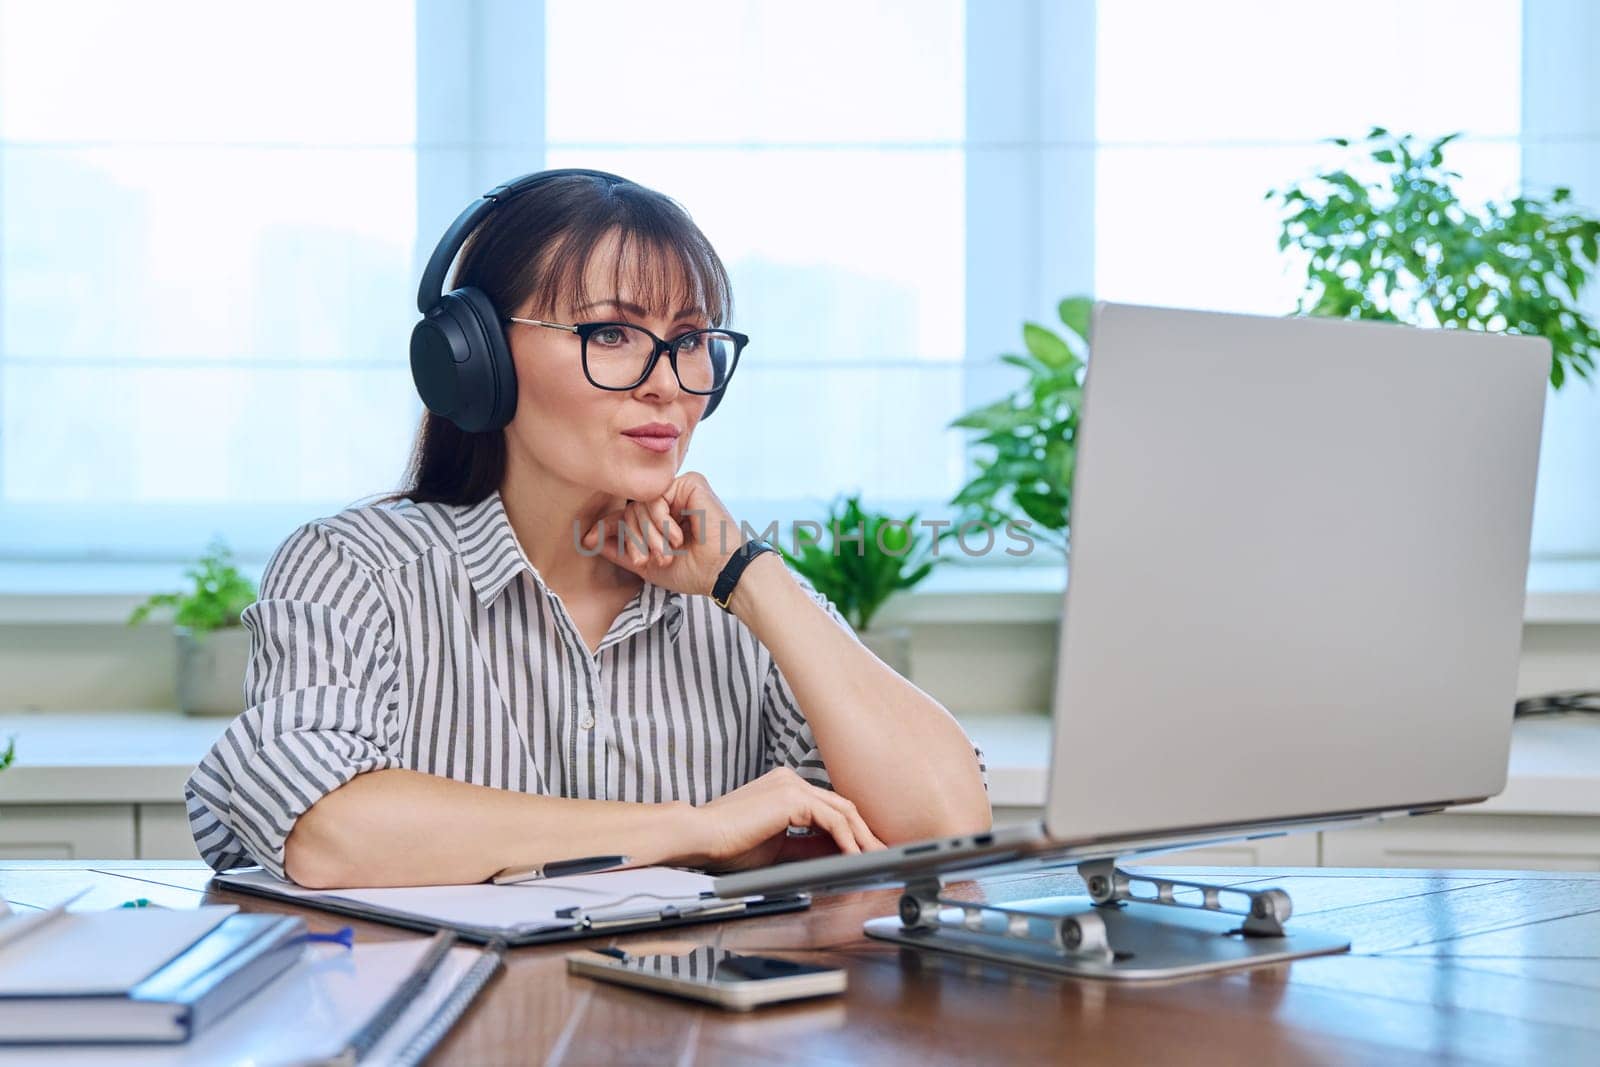 Middle-aged woman in headphones working at computer in home office by VH-studio